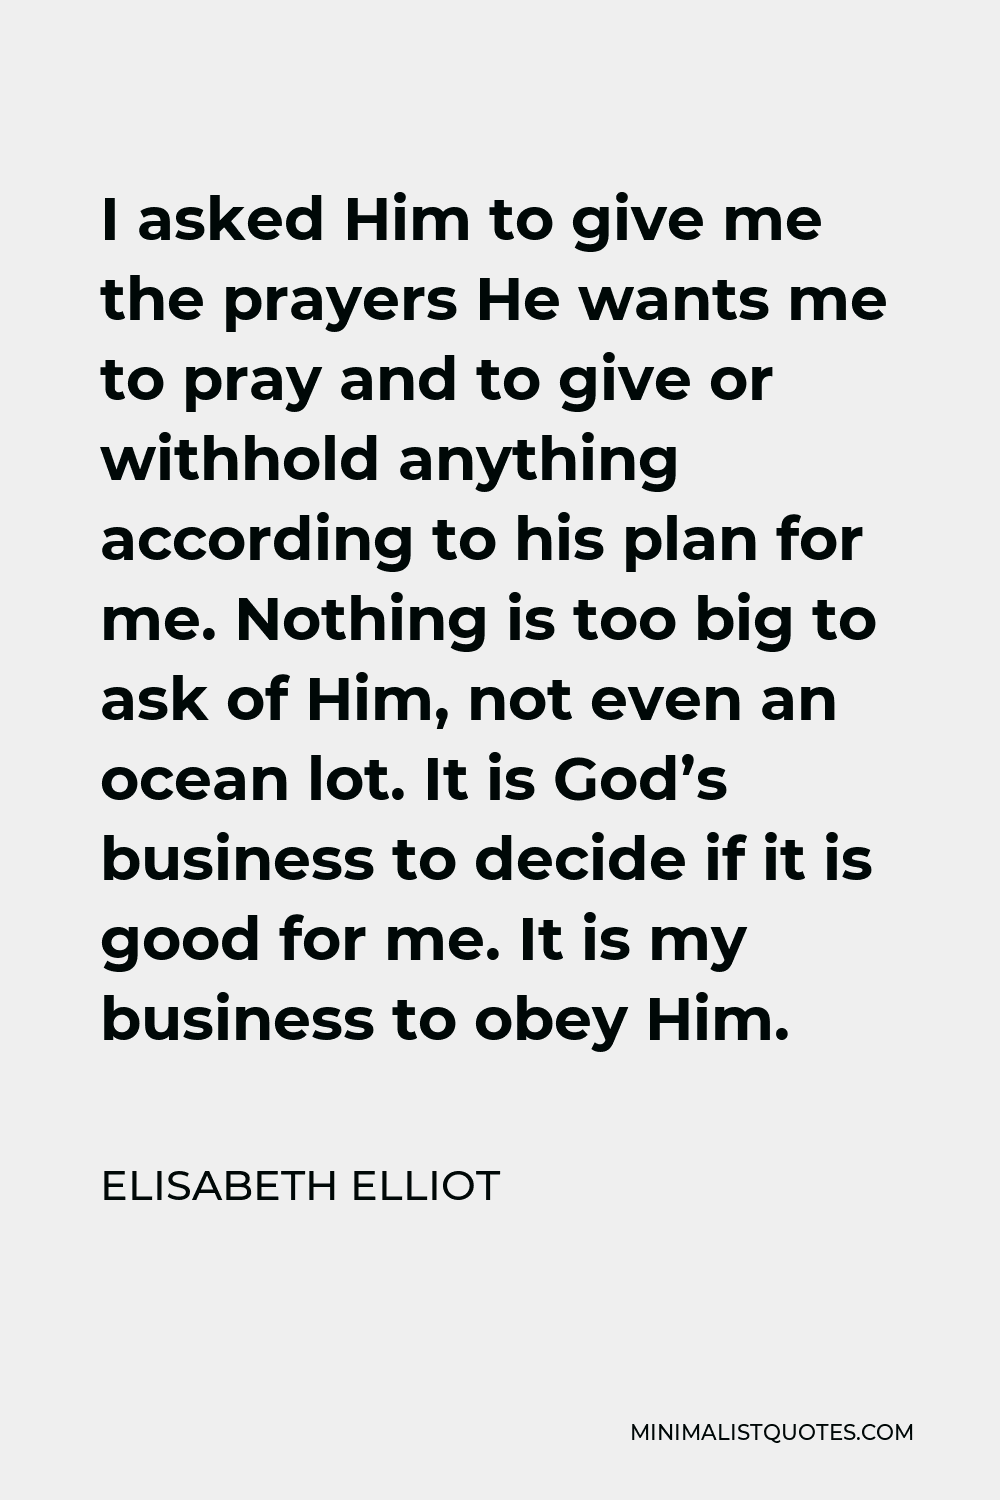 Elisabeth Elliot Quote - I asked Him to give me the prayers He wants me to pray and to give or withhold anything according to his plan for me. Nothing is too big to ask of Him, not even an ocean lot. It is God’s business to decide if it is good for me. It is my business to obey Him.